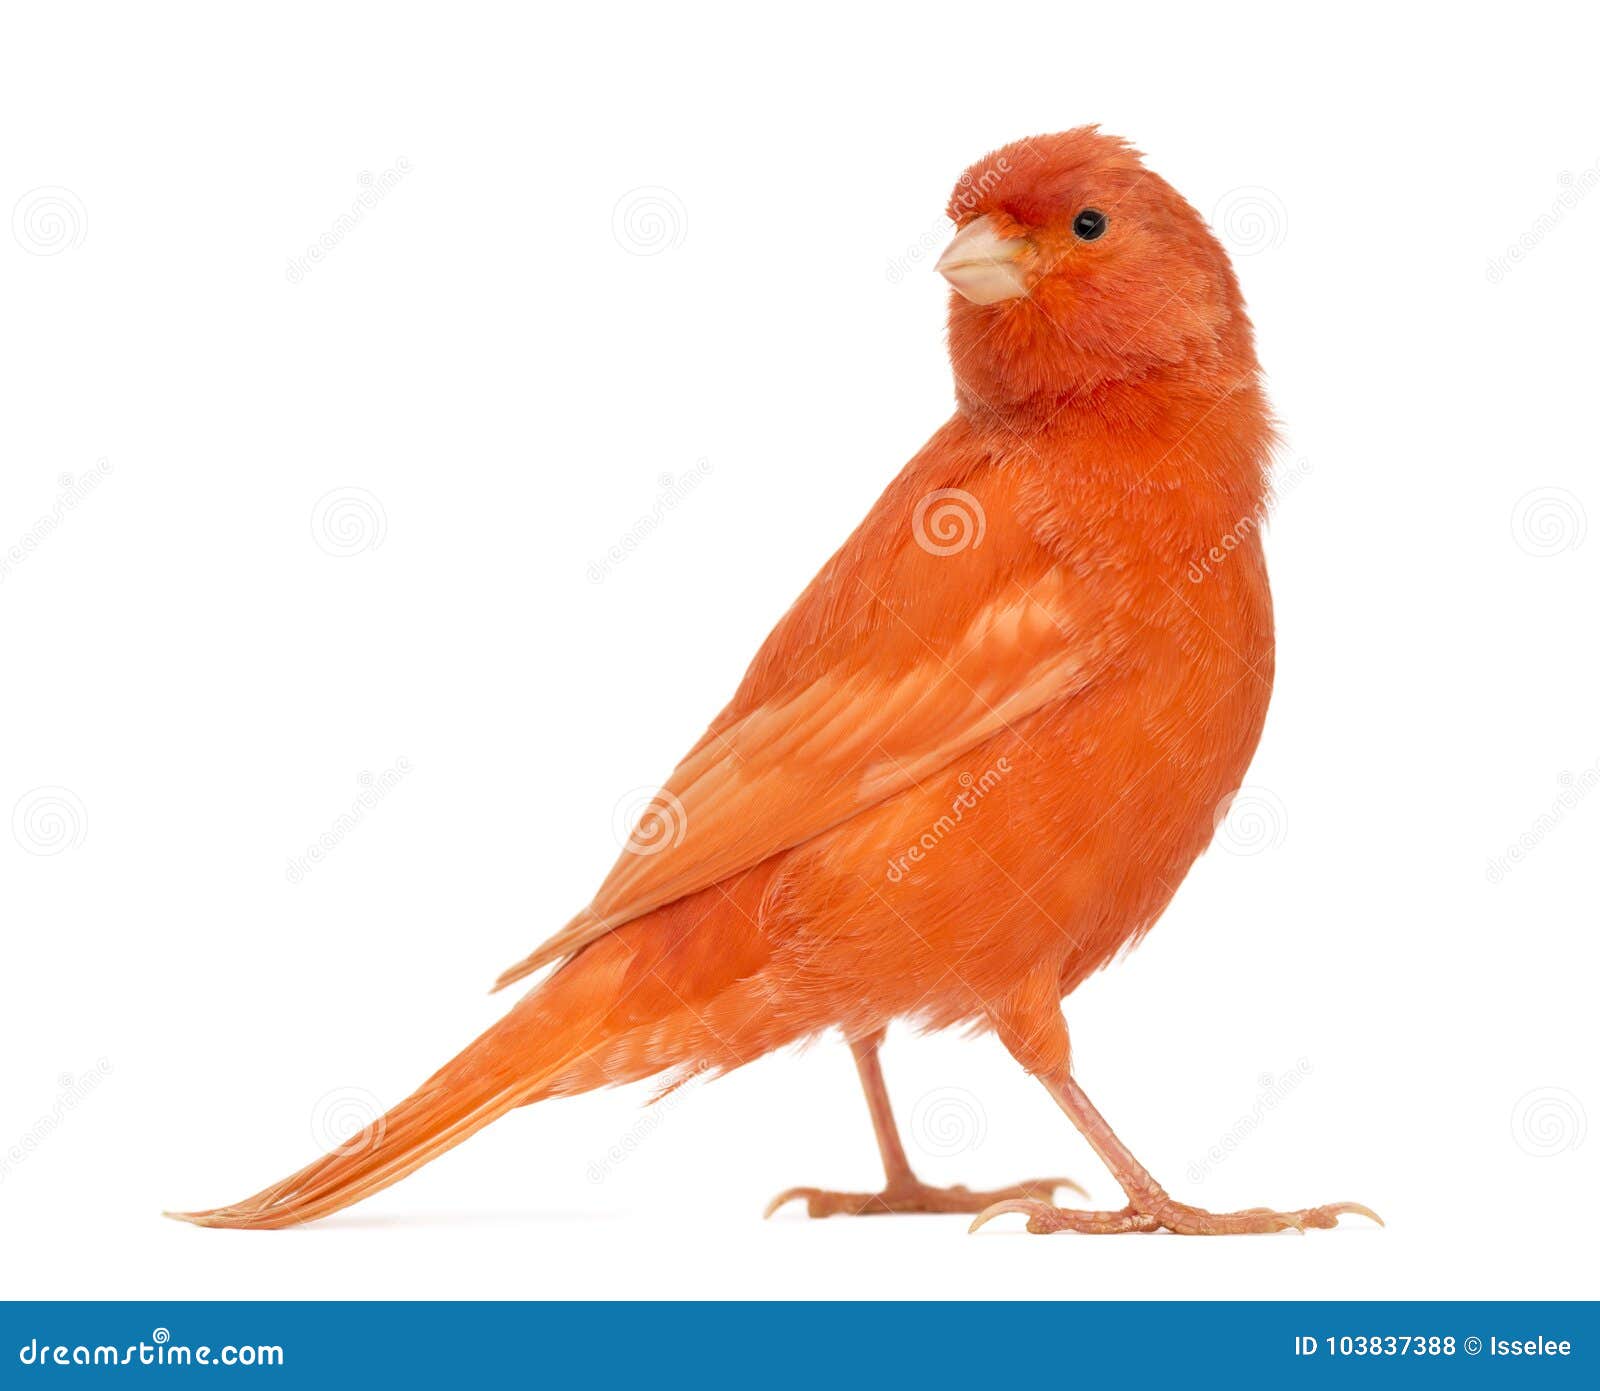 red canary, serinus canaria, against white background